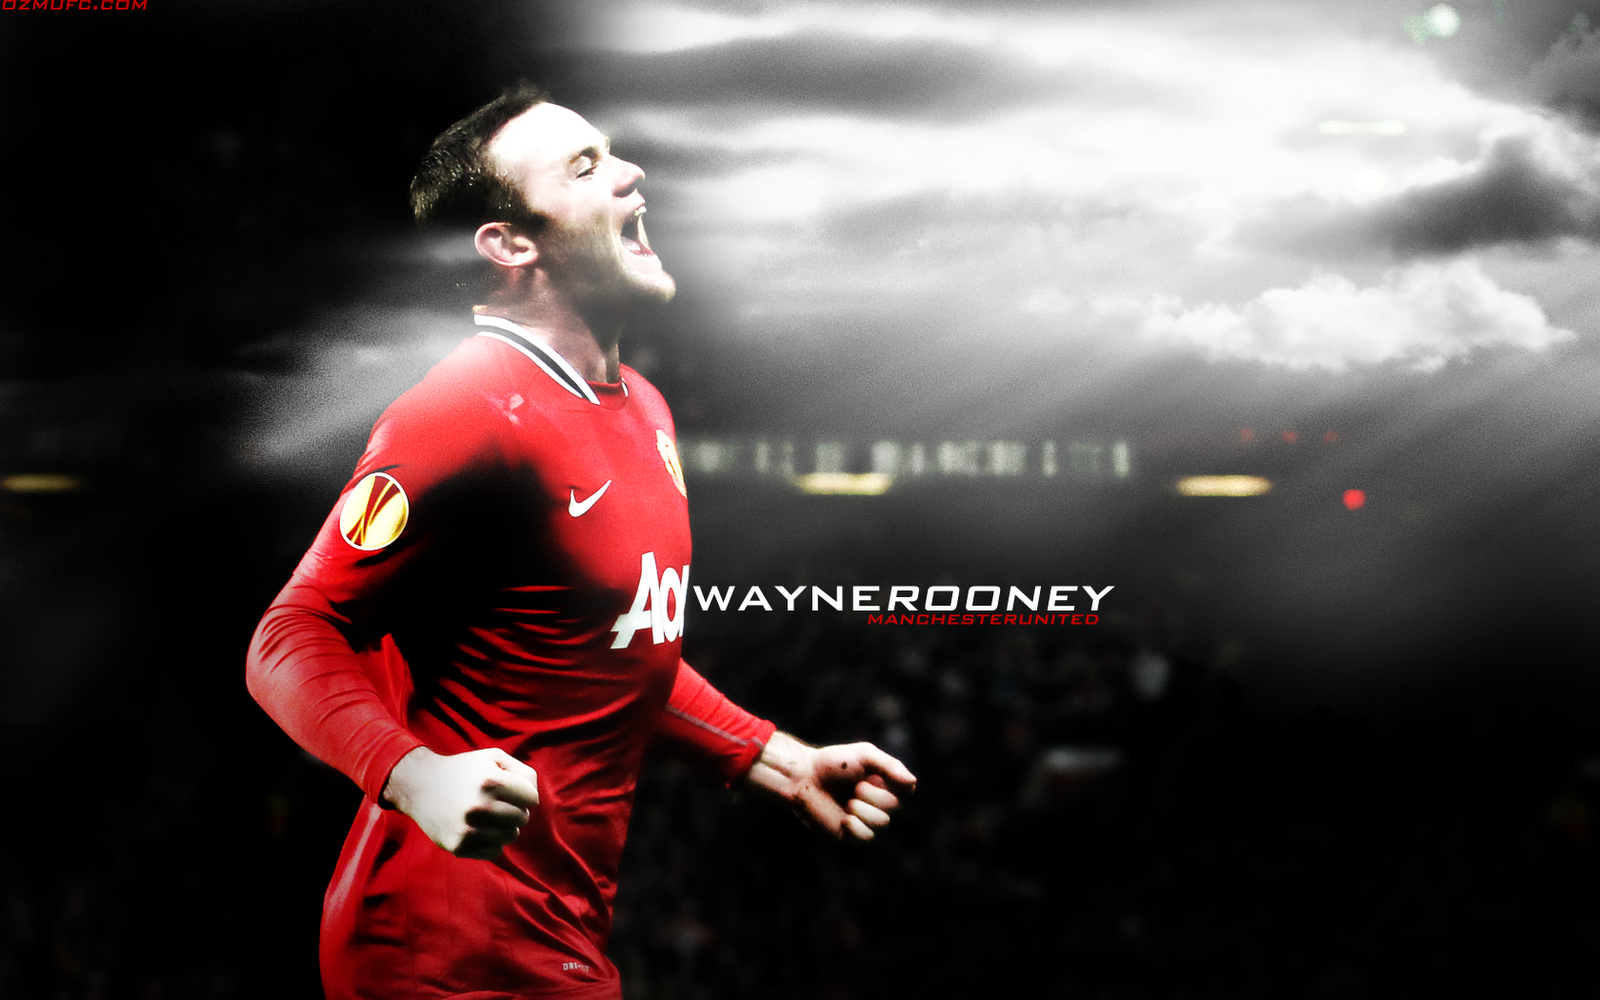 Wayne Rooney "10" Wallpaper 2012 | Wallpapers, Photos, Images and Profile